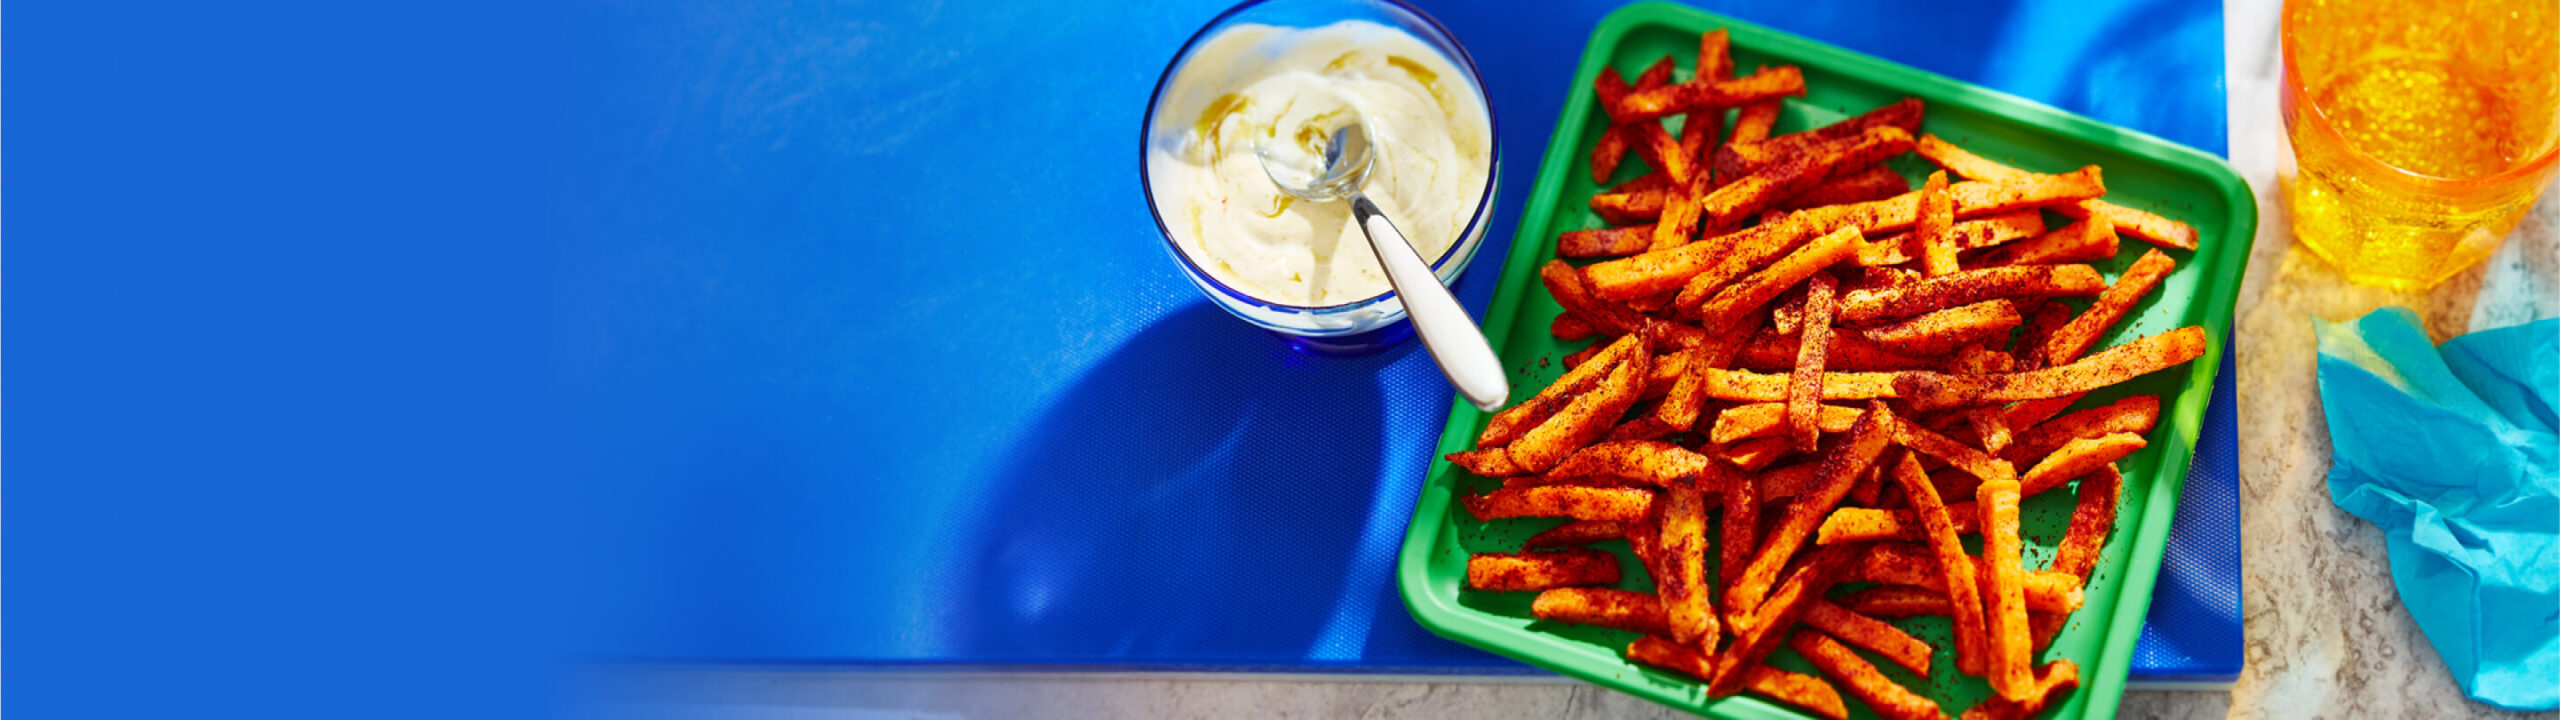 Sweet potato fries on a green plate with a side of extra spicy dip in a bowl.